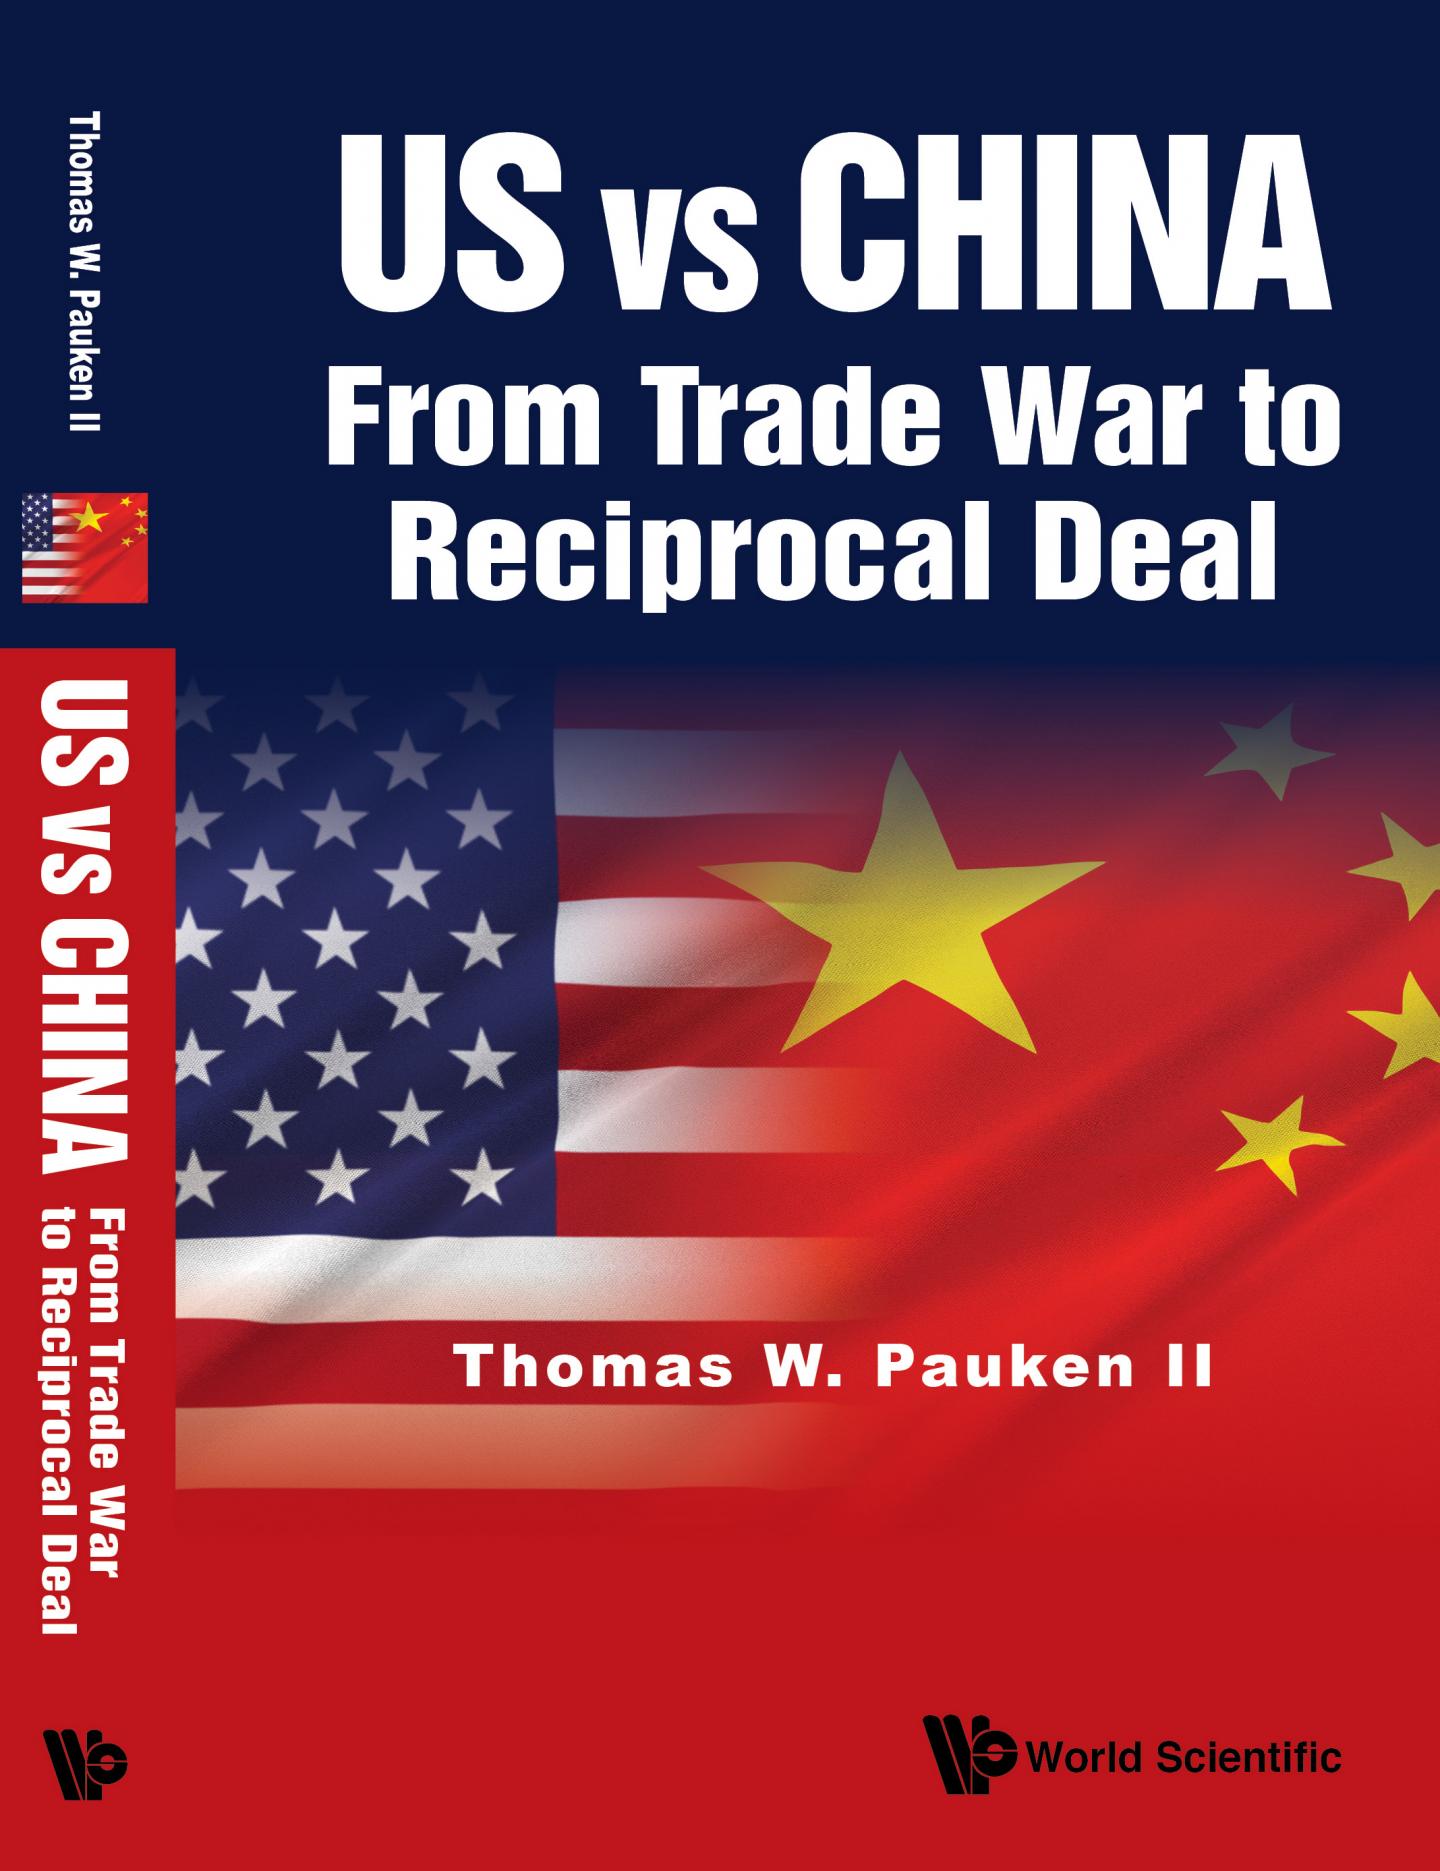 US vs. China: From Trade Wars to Reciprocal Deal